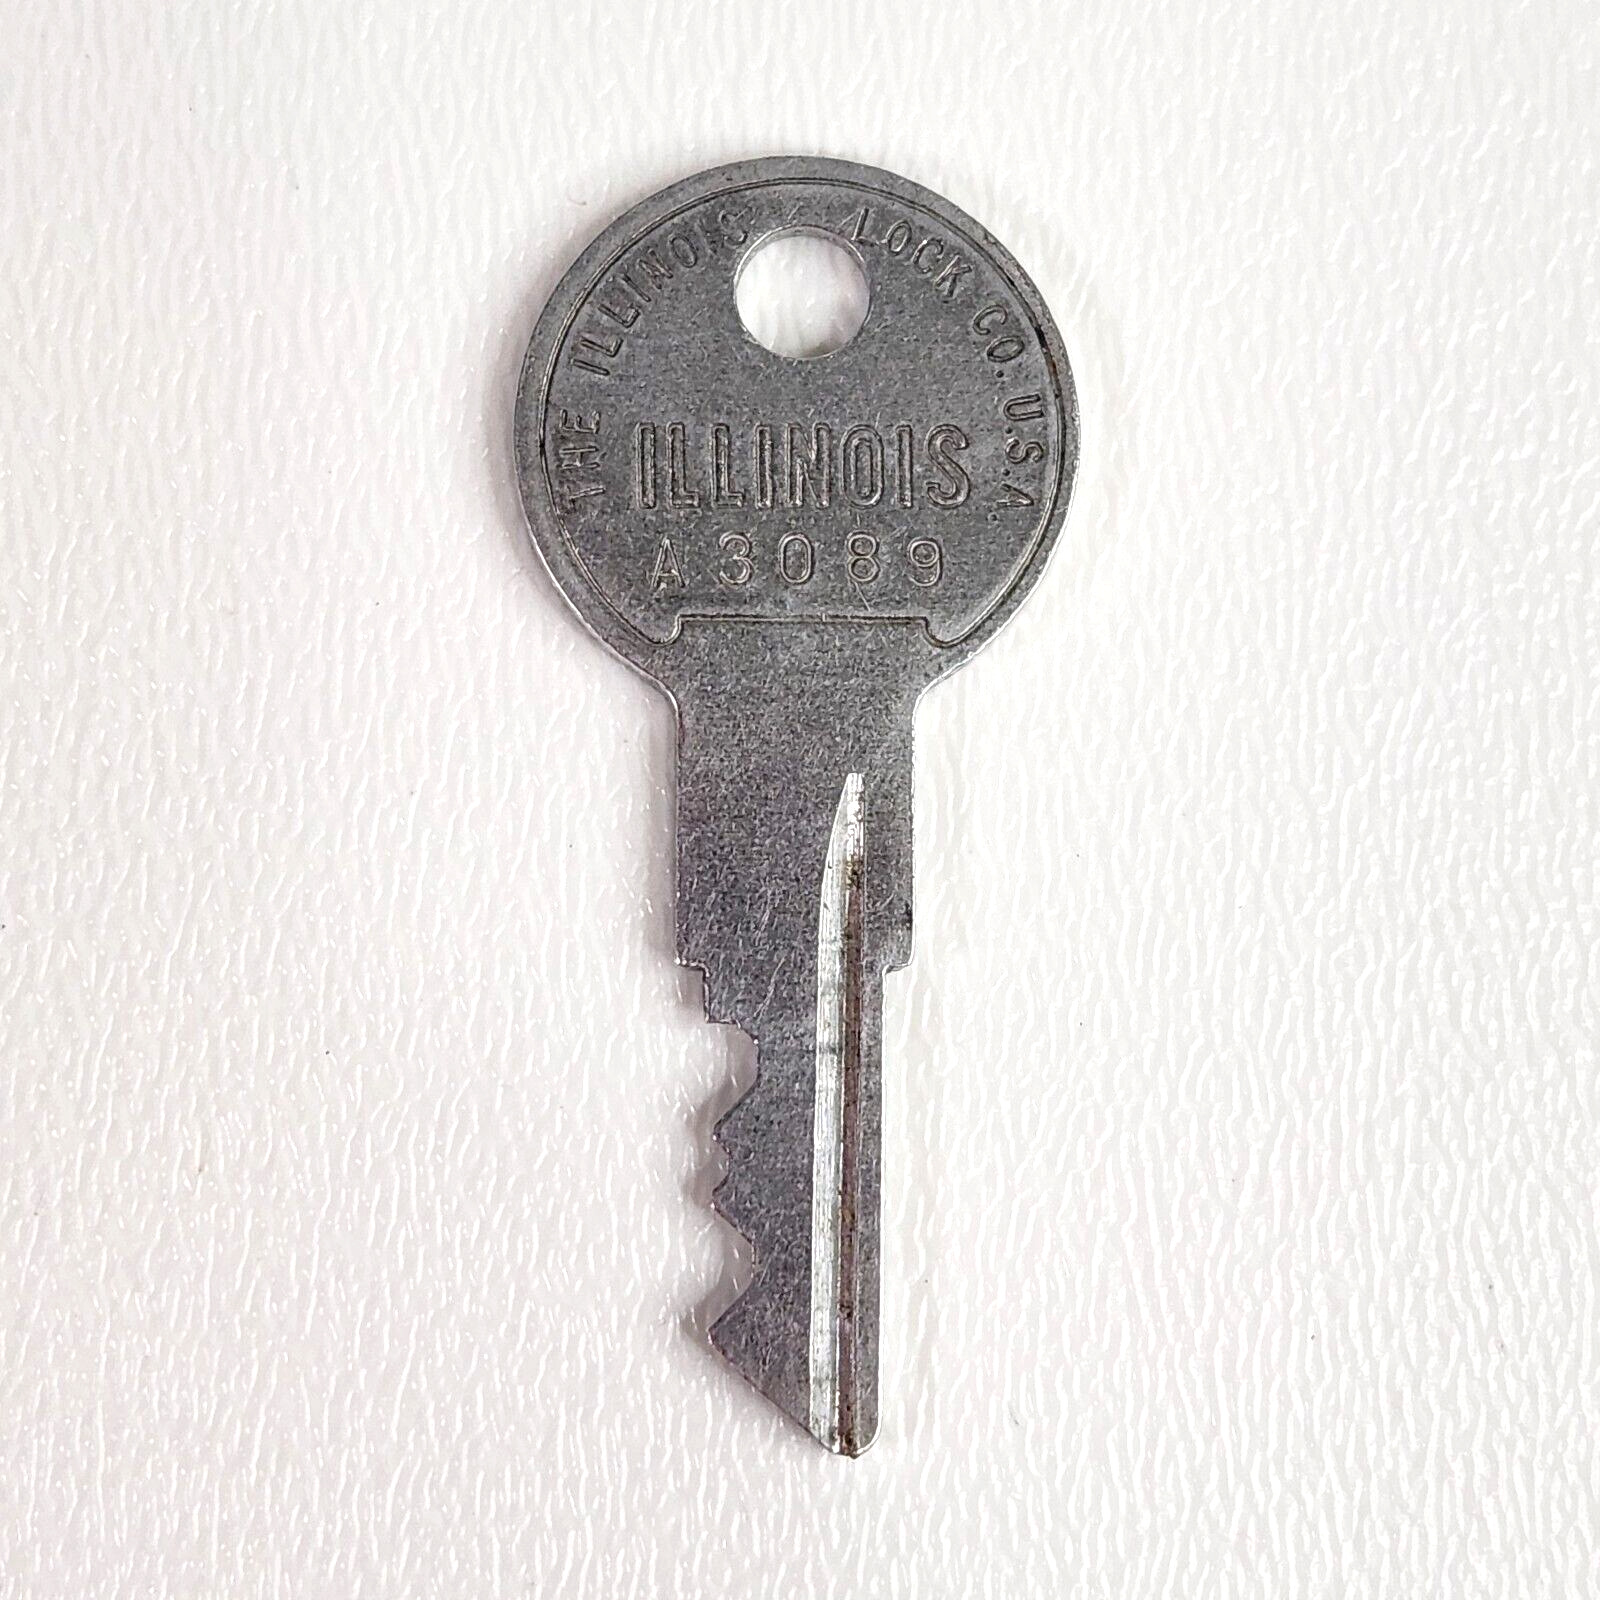 ILLINOIS A3089 Made In USA Key KY Silver